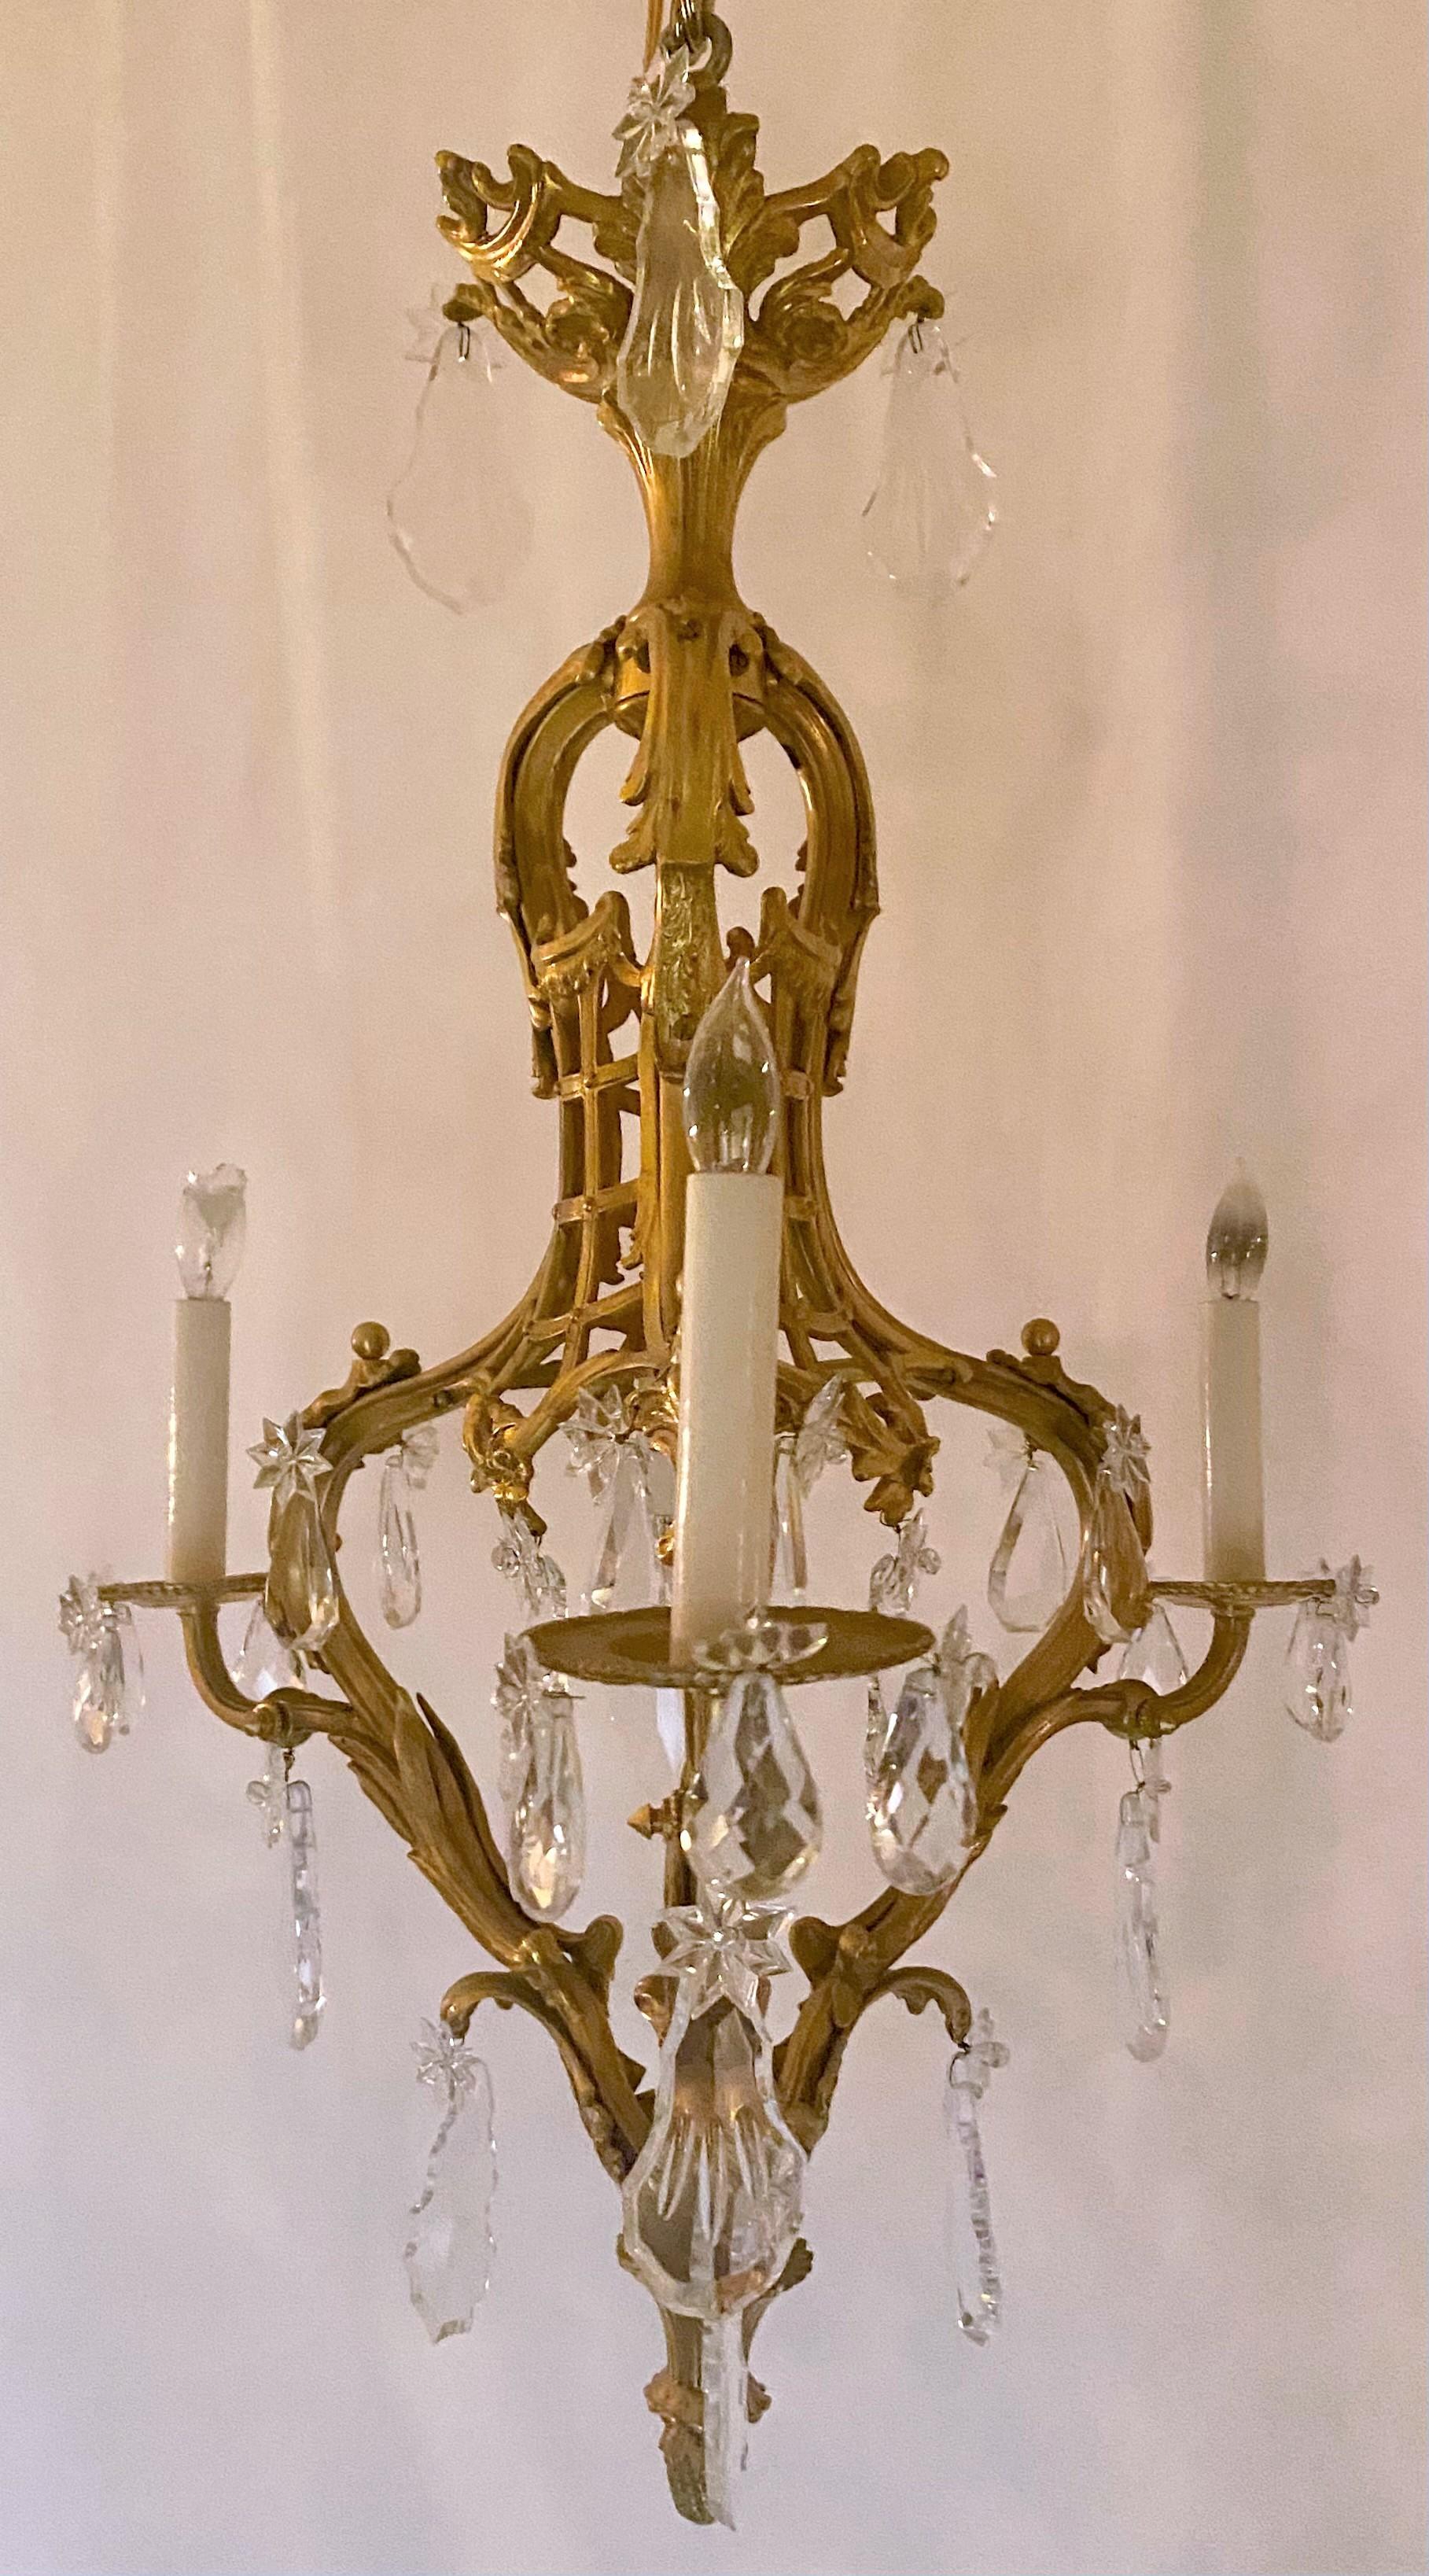 Antique French Louis XV superb quality ormolu and baccarat crystal 3-light chandelier, circa 1870-1880.
CHC202.